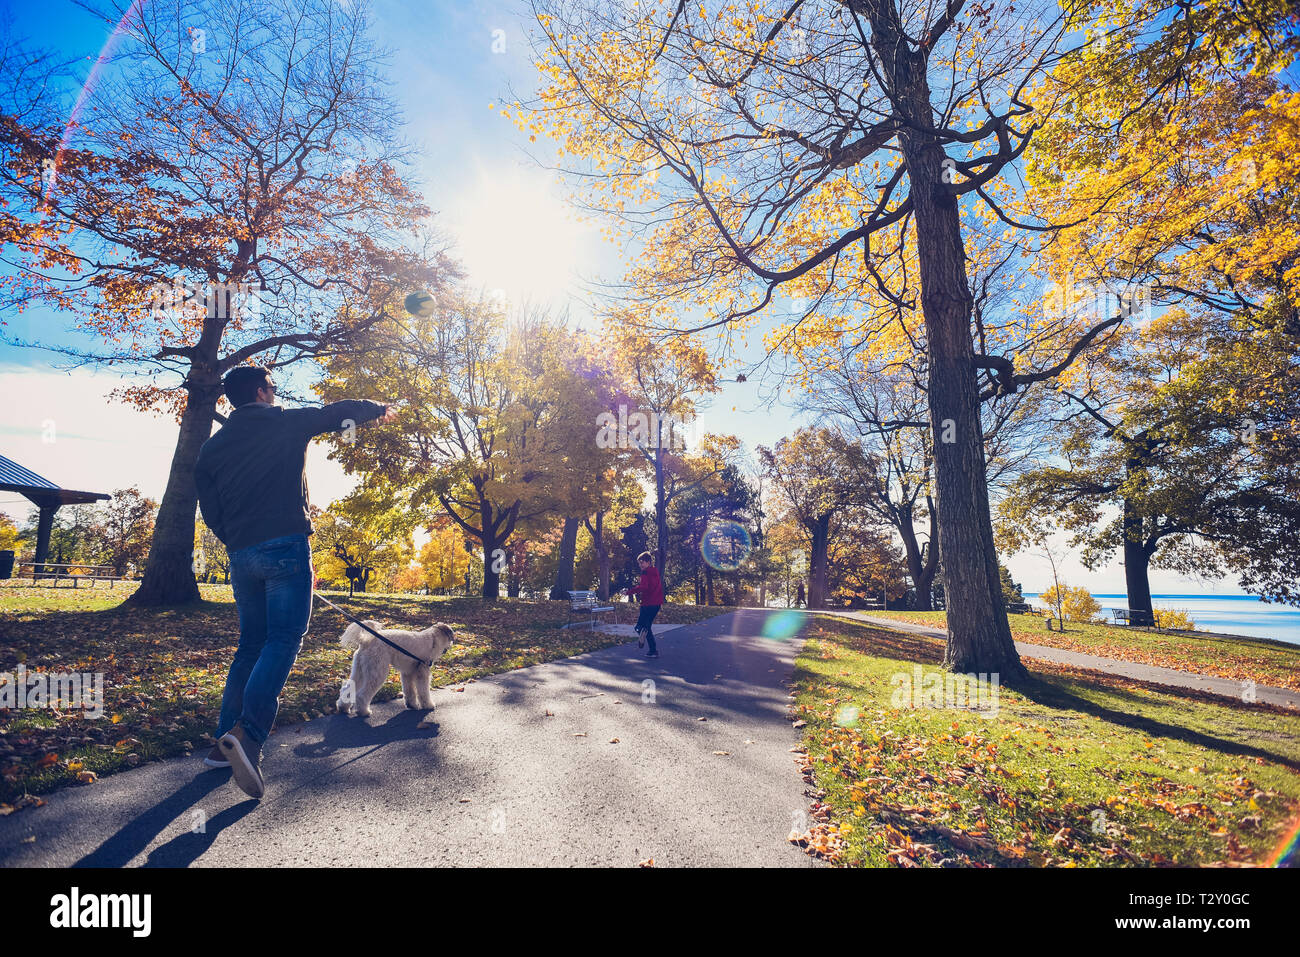 Man walking dog throwing football to boy in a park on autumn day. Stock Photo